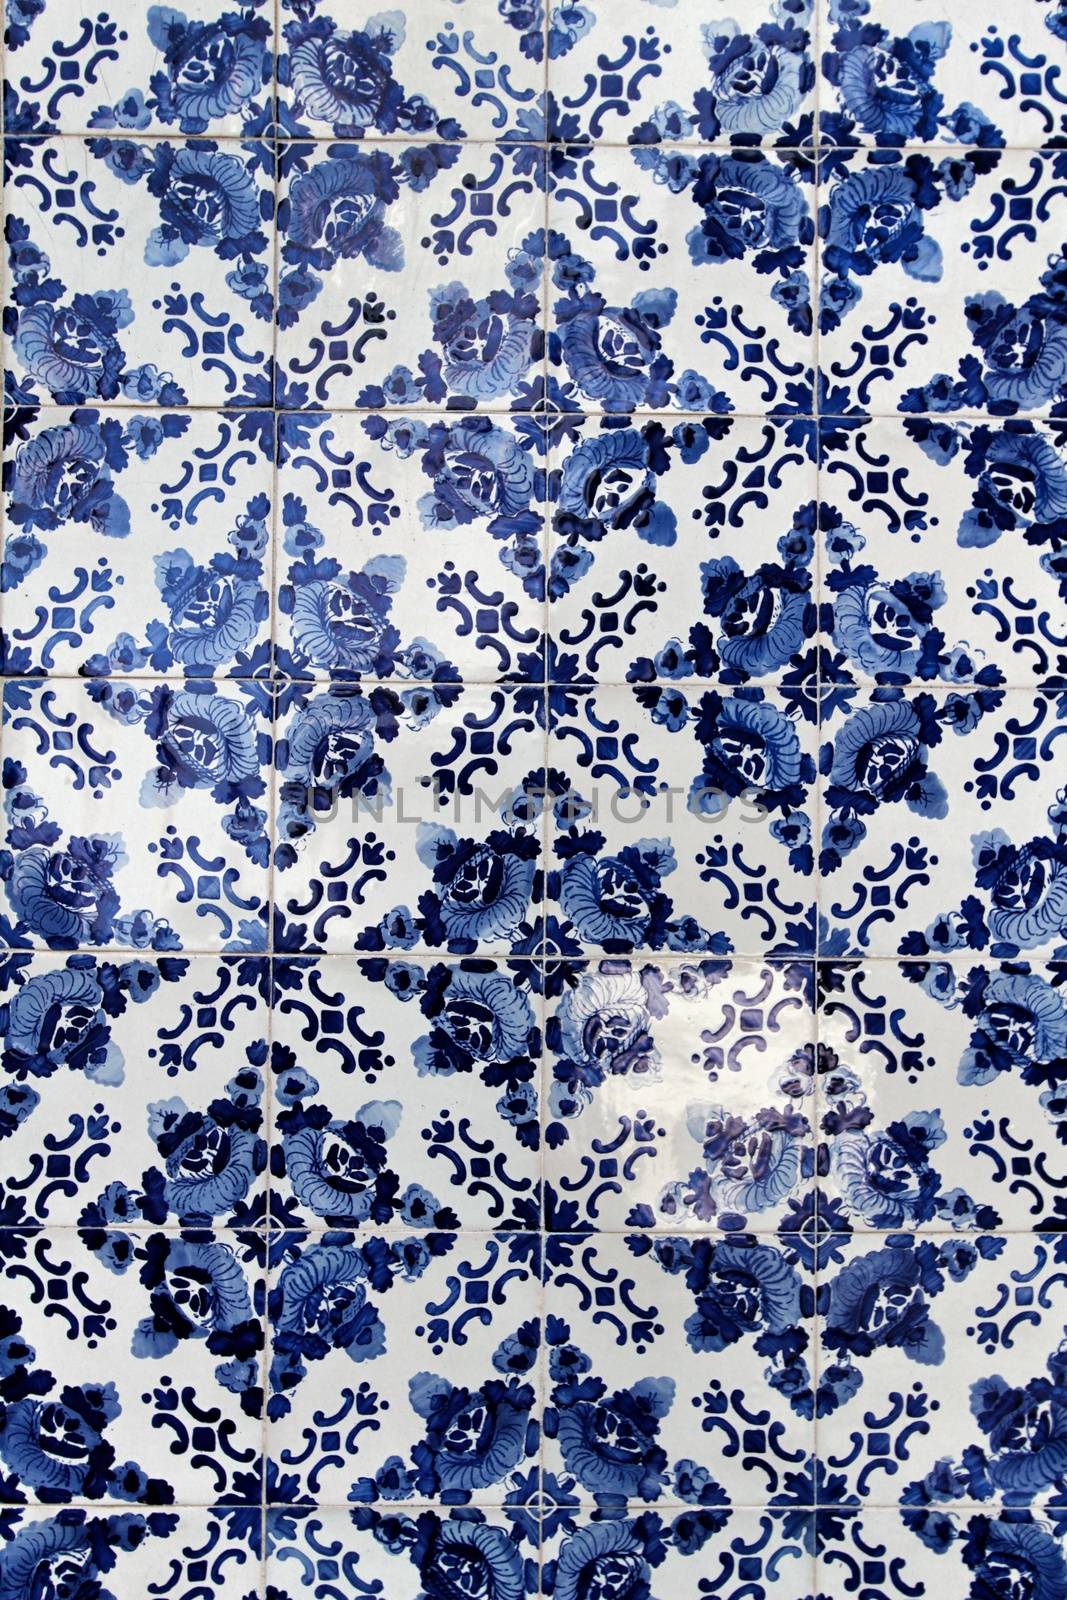 Colorful and vintage tiles of Portugal by soniabonet